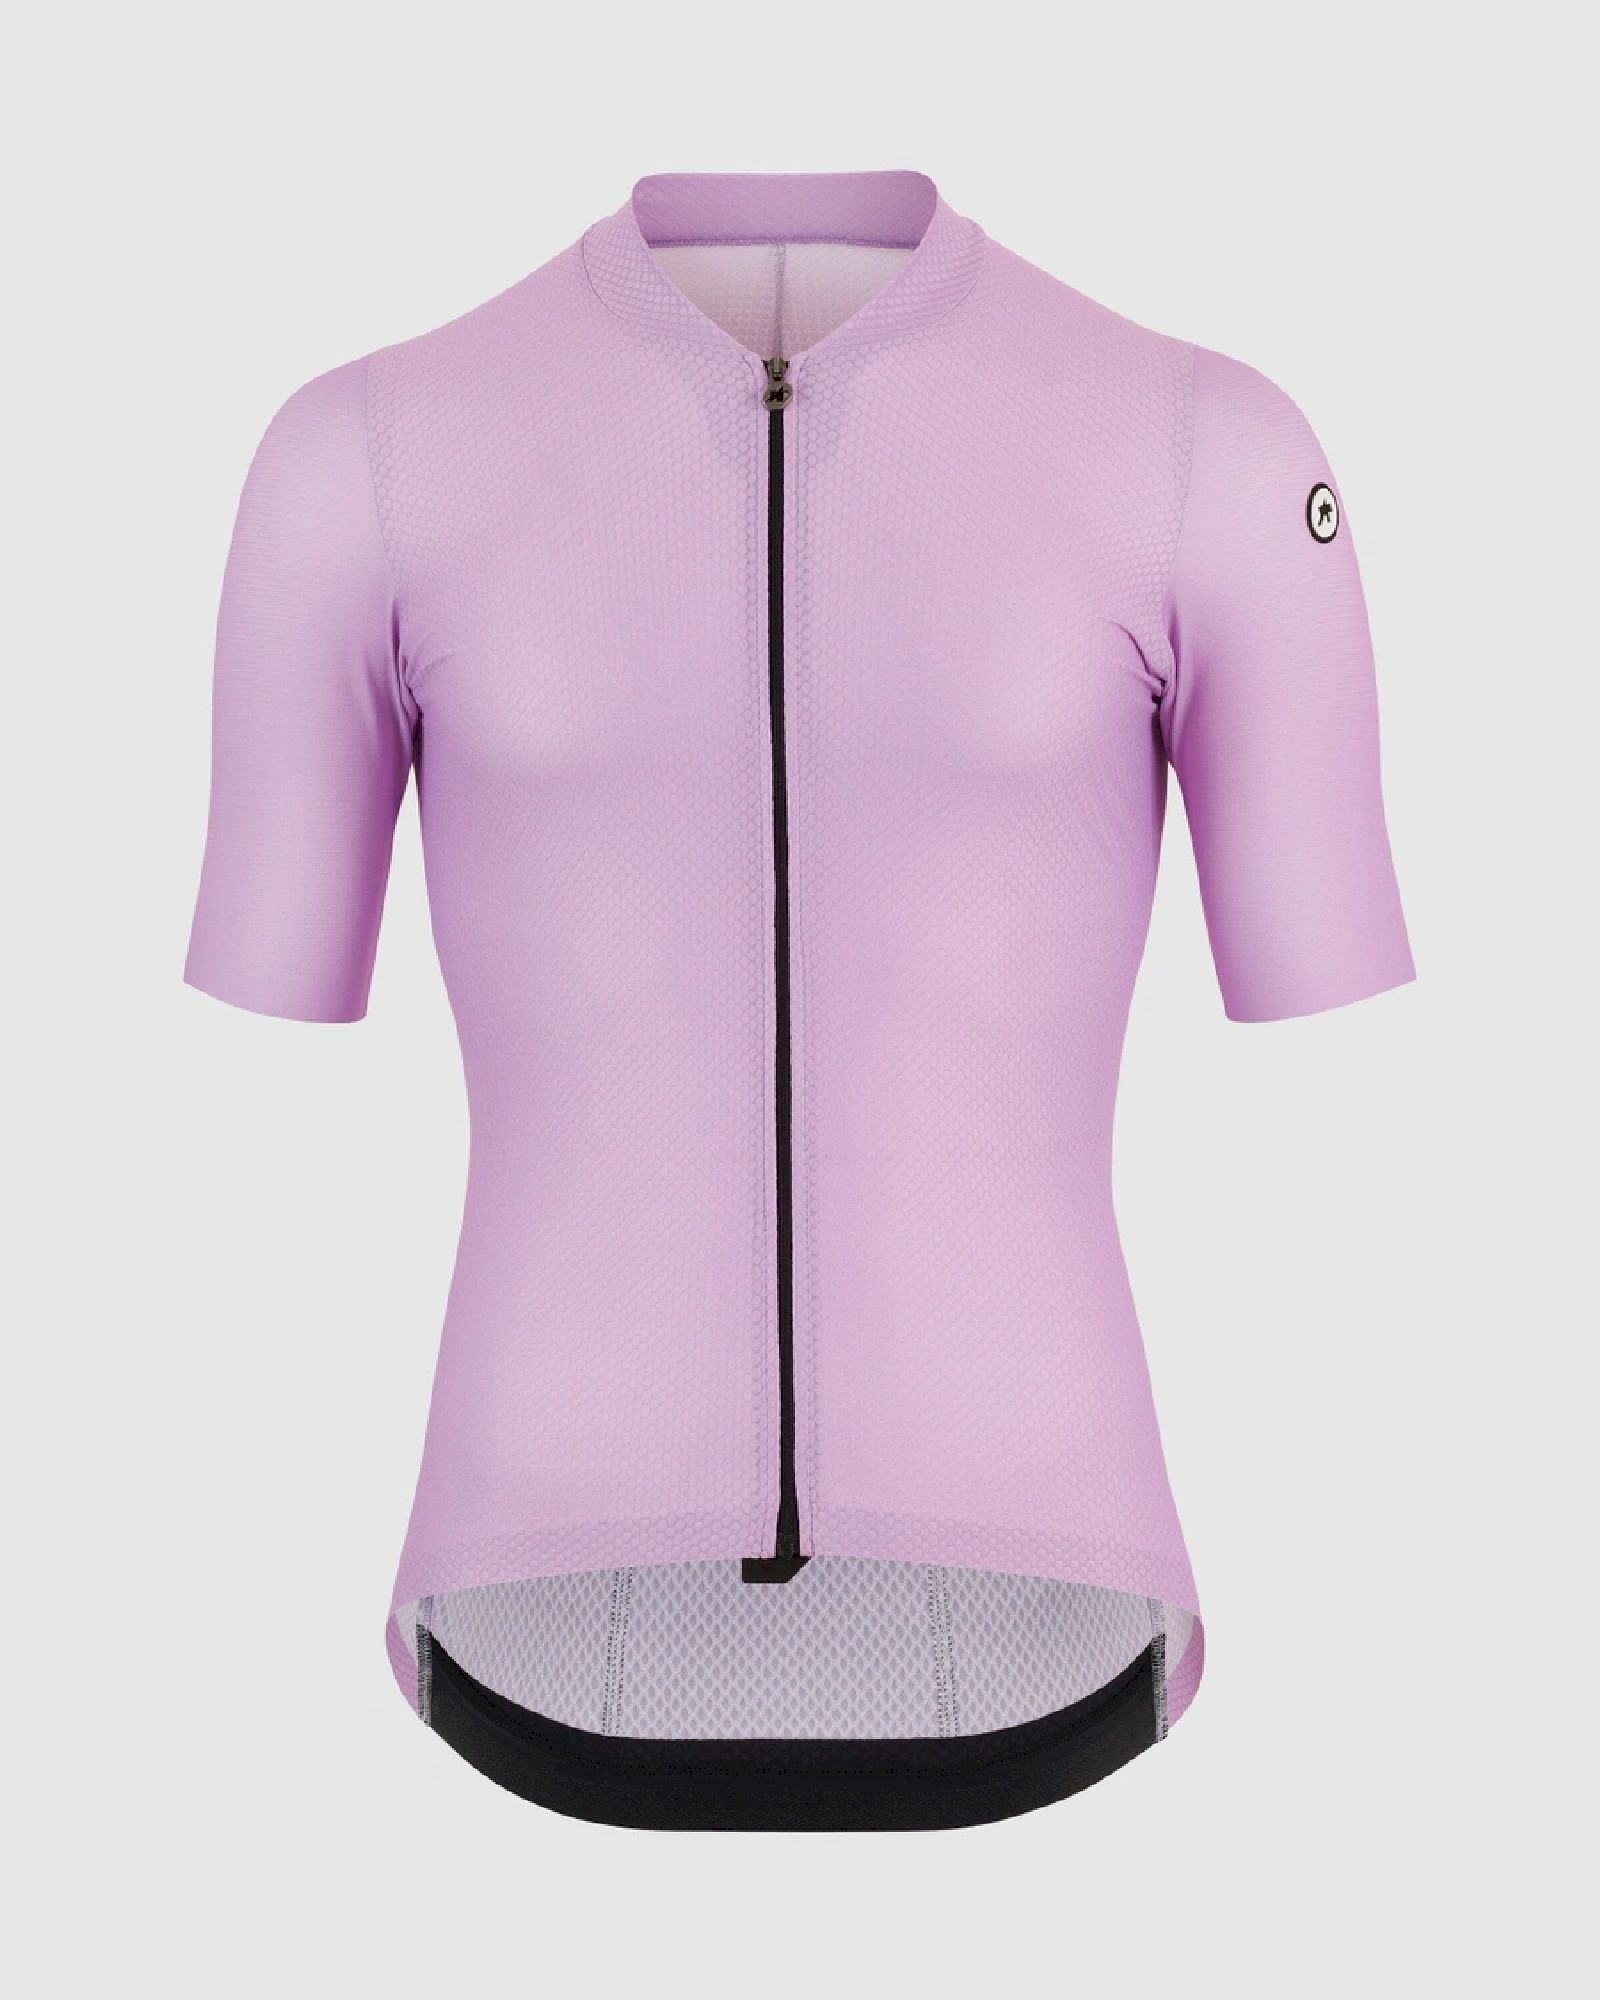 Assos Mille GT Drylite Jersey S11 - Cycling jersey - Men's | Hardloop